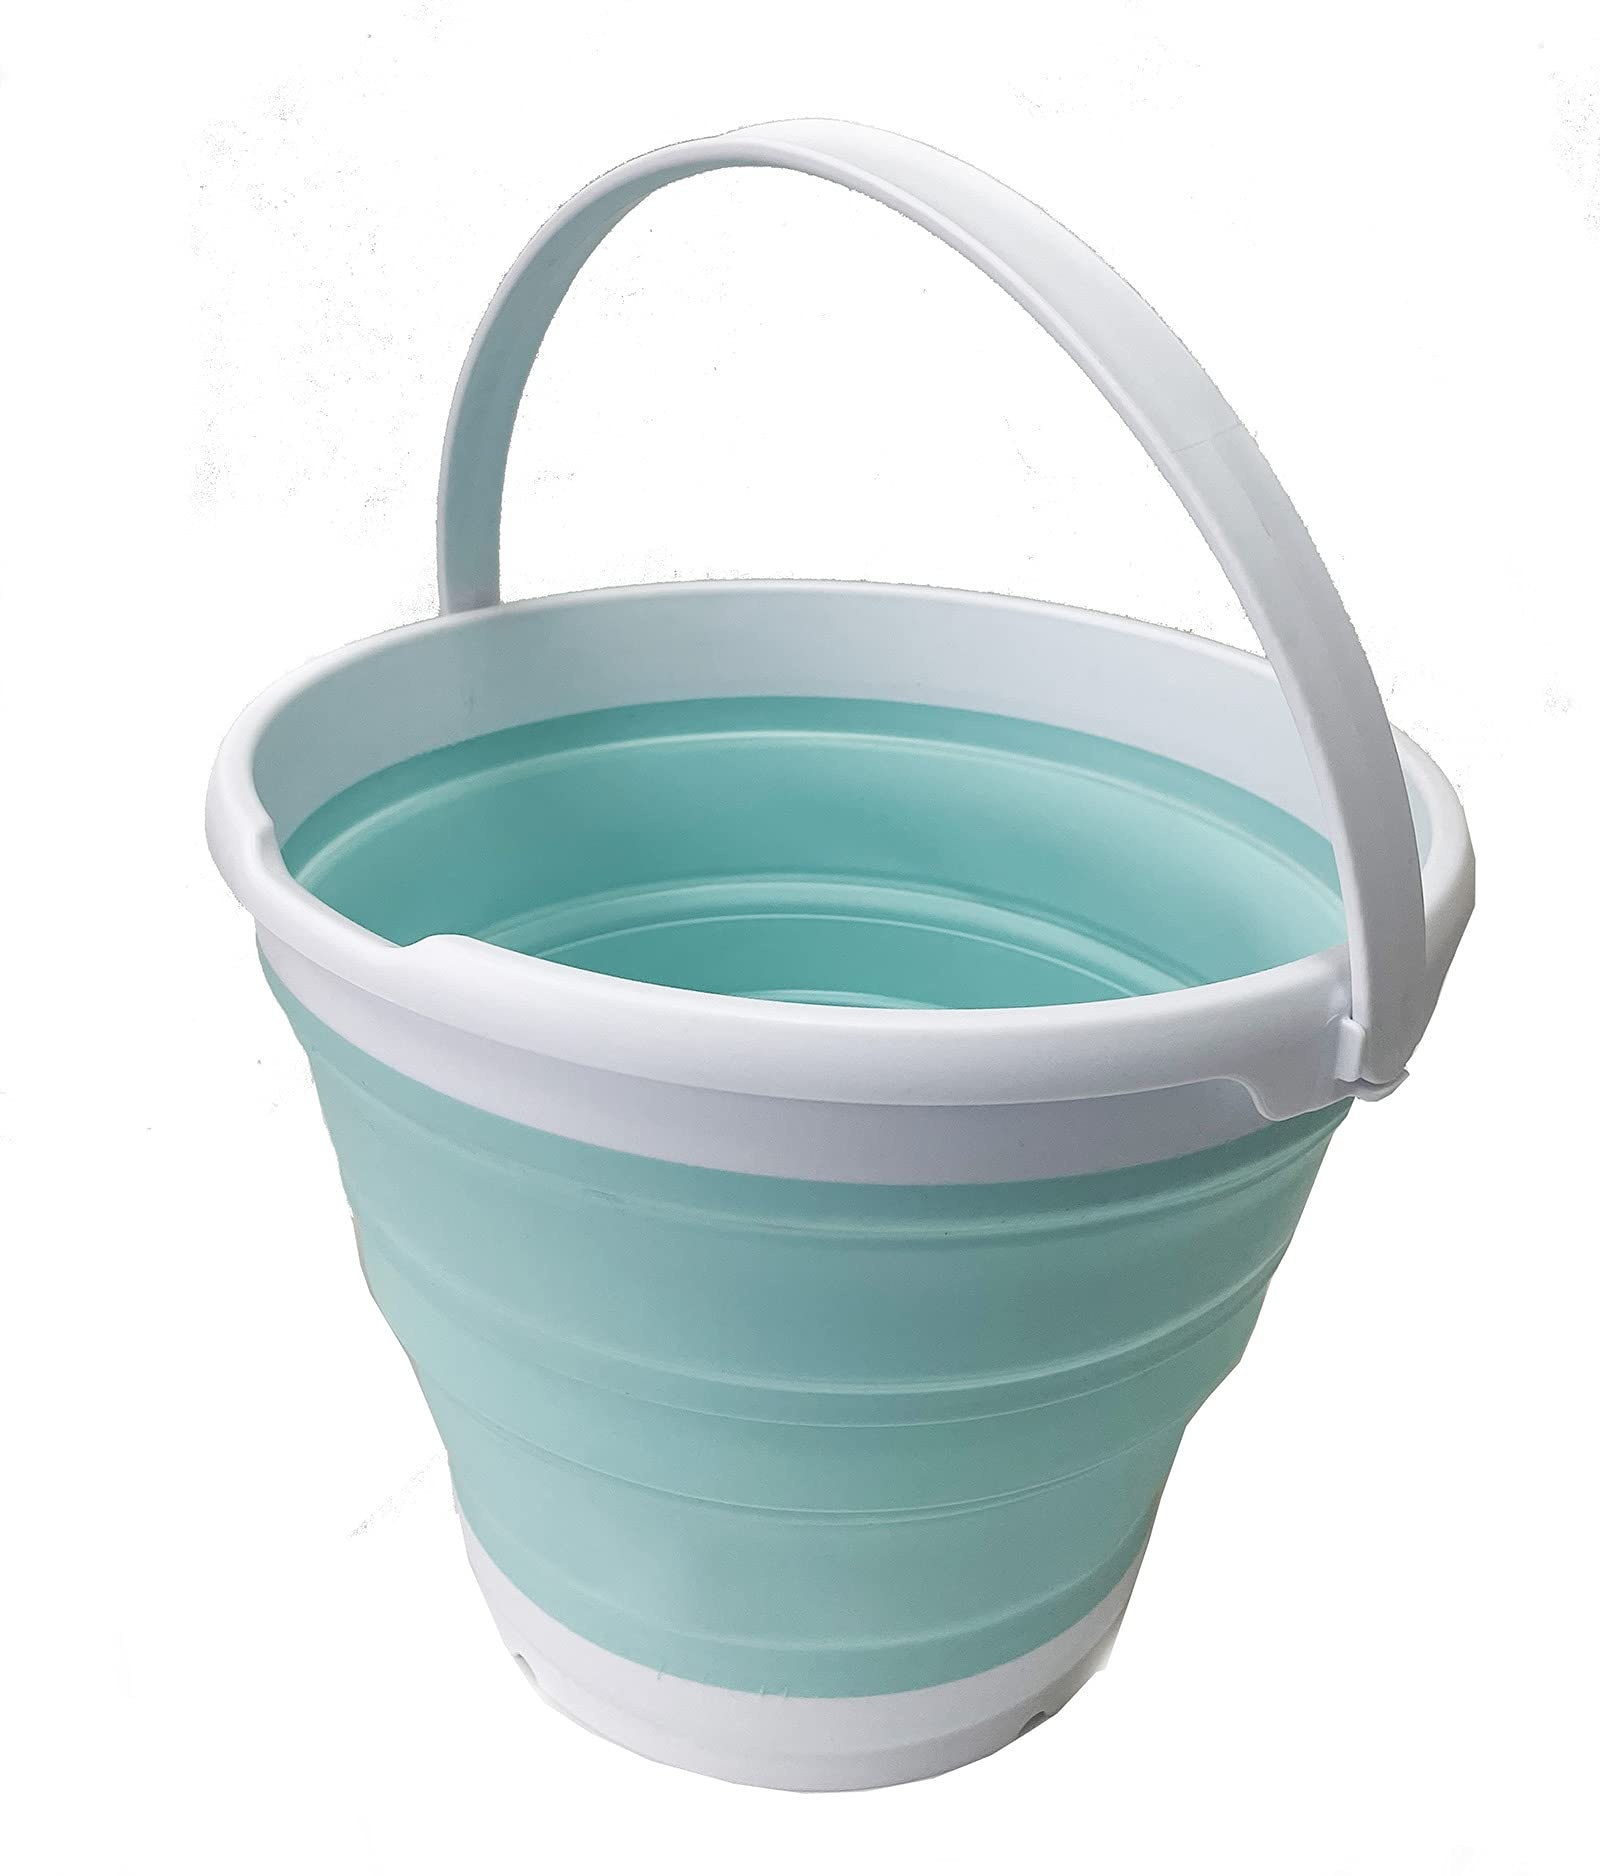 SAMMART 10L Collapsible Plastic Bucket - Foldable Round Tub - Portable Fishing Water Pail - Space Saving Outdoor Waterpot, Size 33cm Dia (1, Weiß/Seegrün)